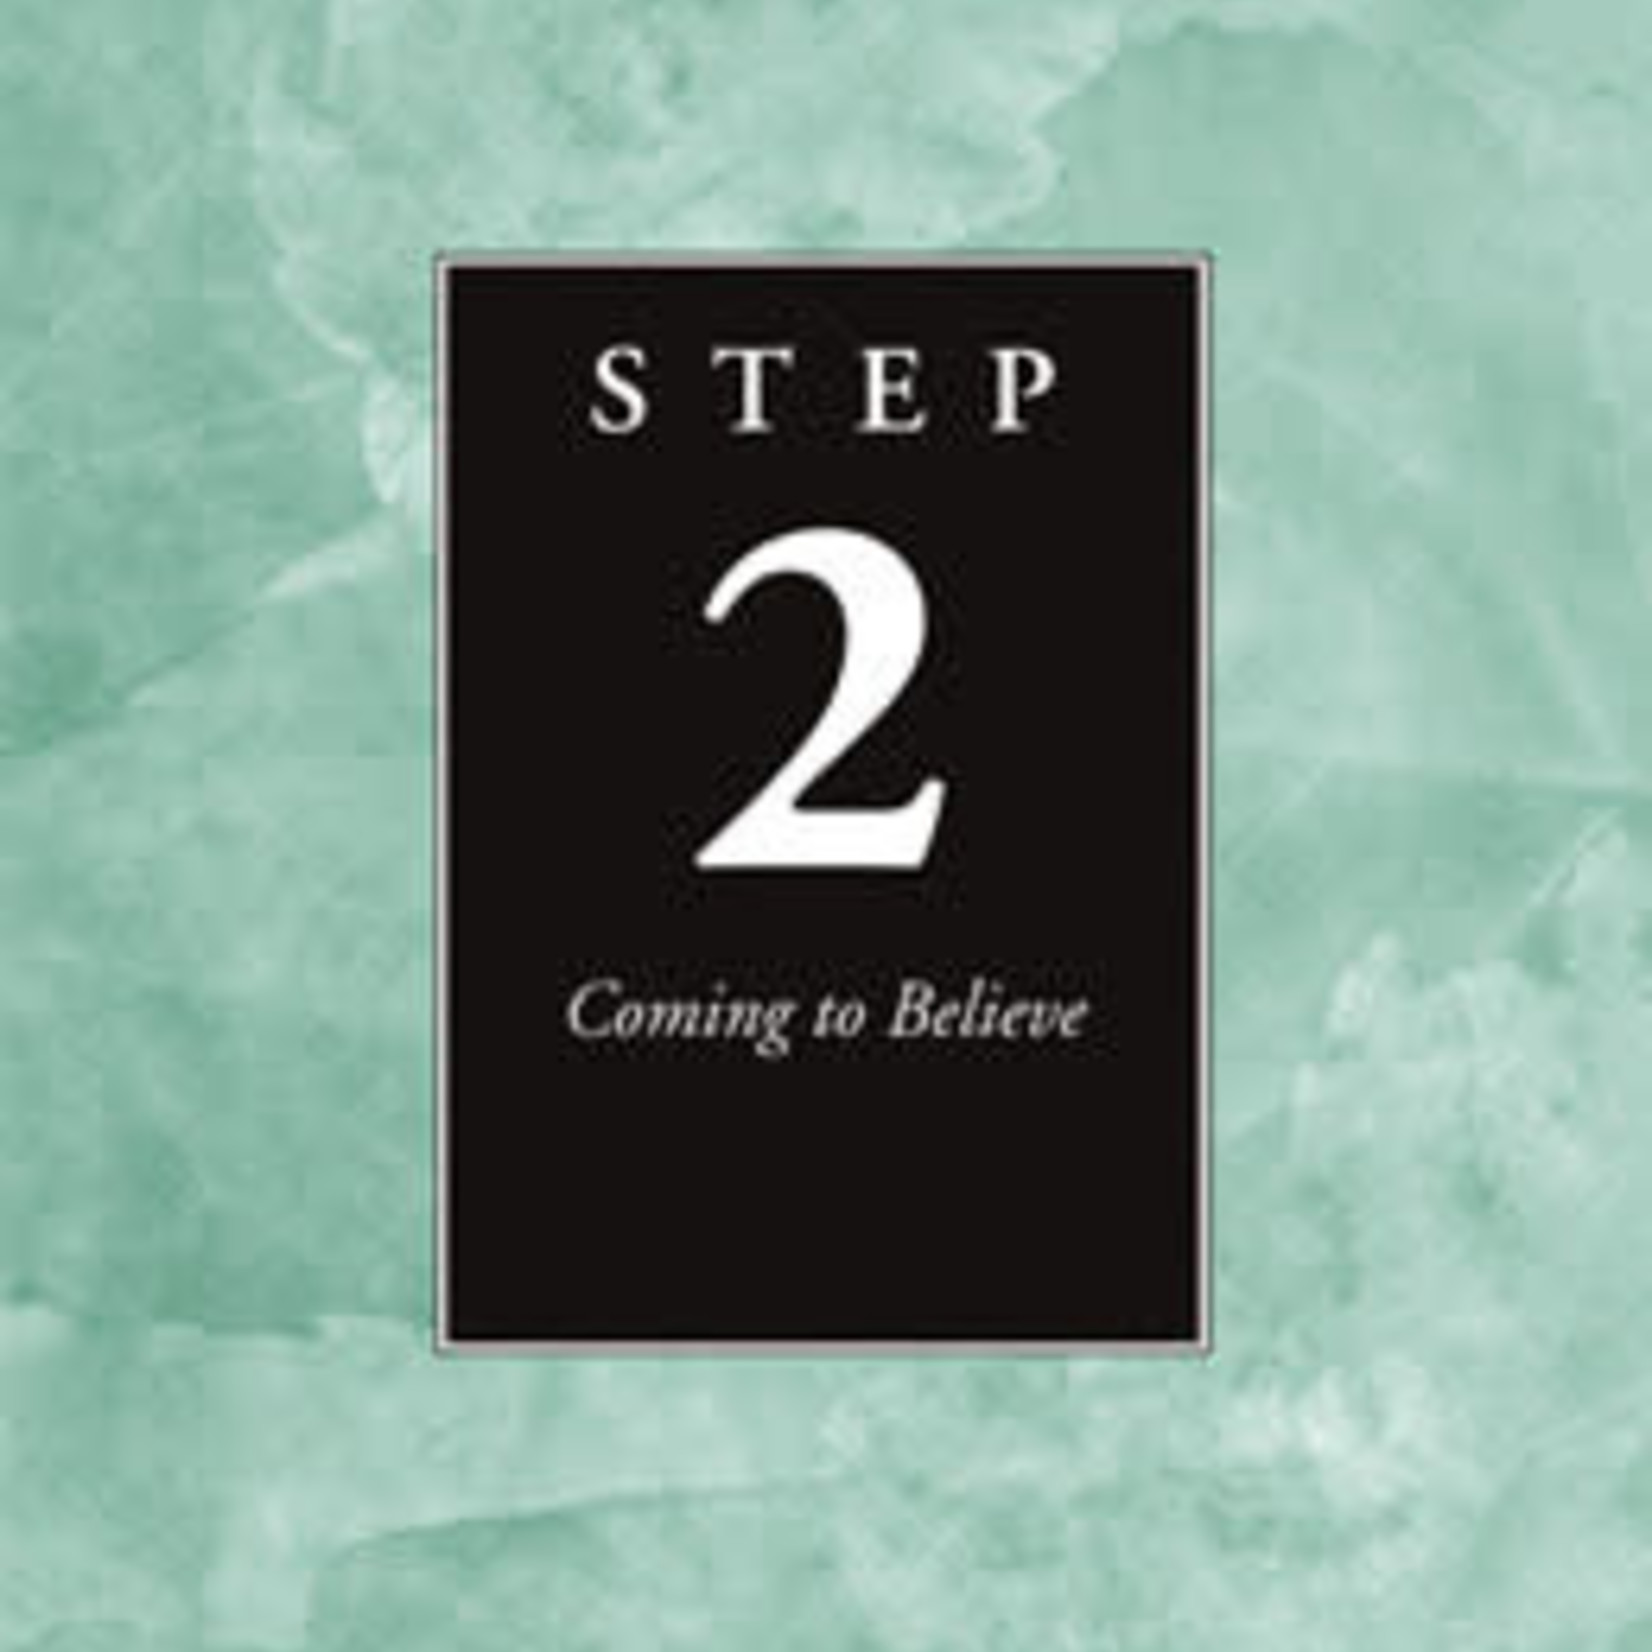 [Step 02] Coming To Believe